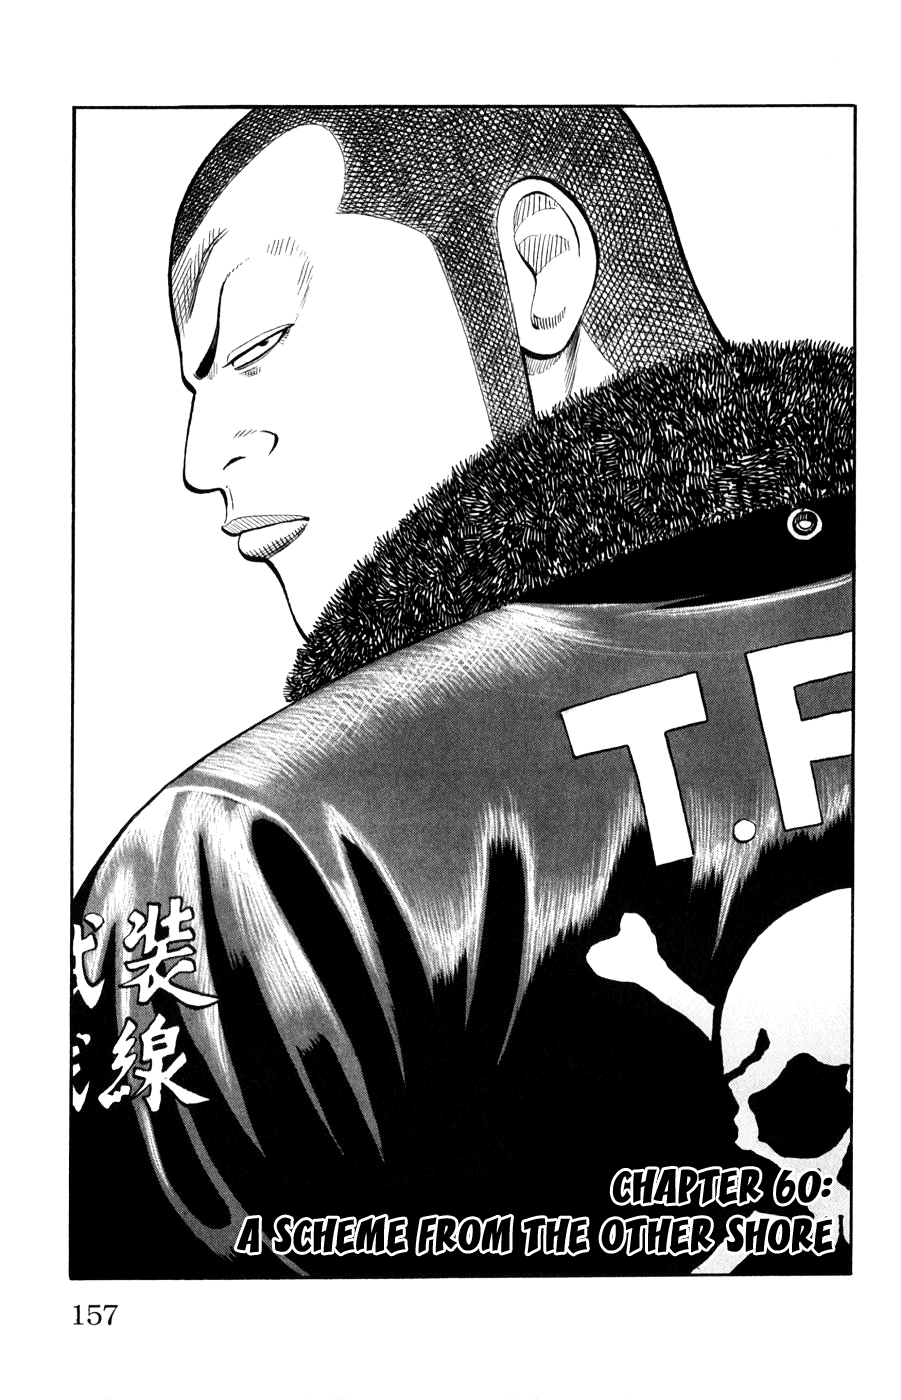 Worst Chapter 60: A Scheme From The Other Shore - Picture 1